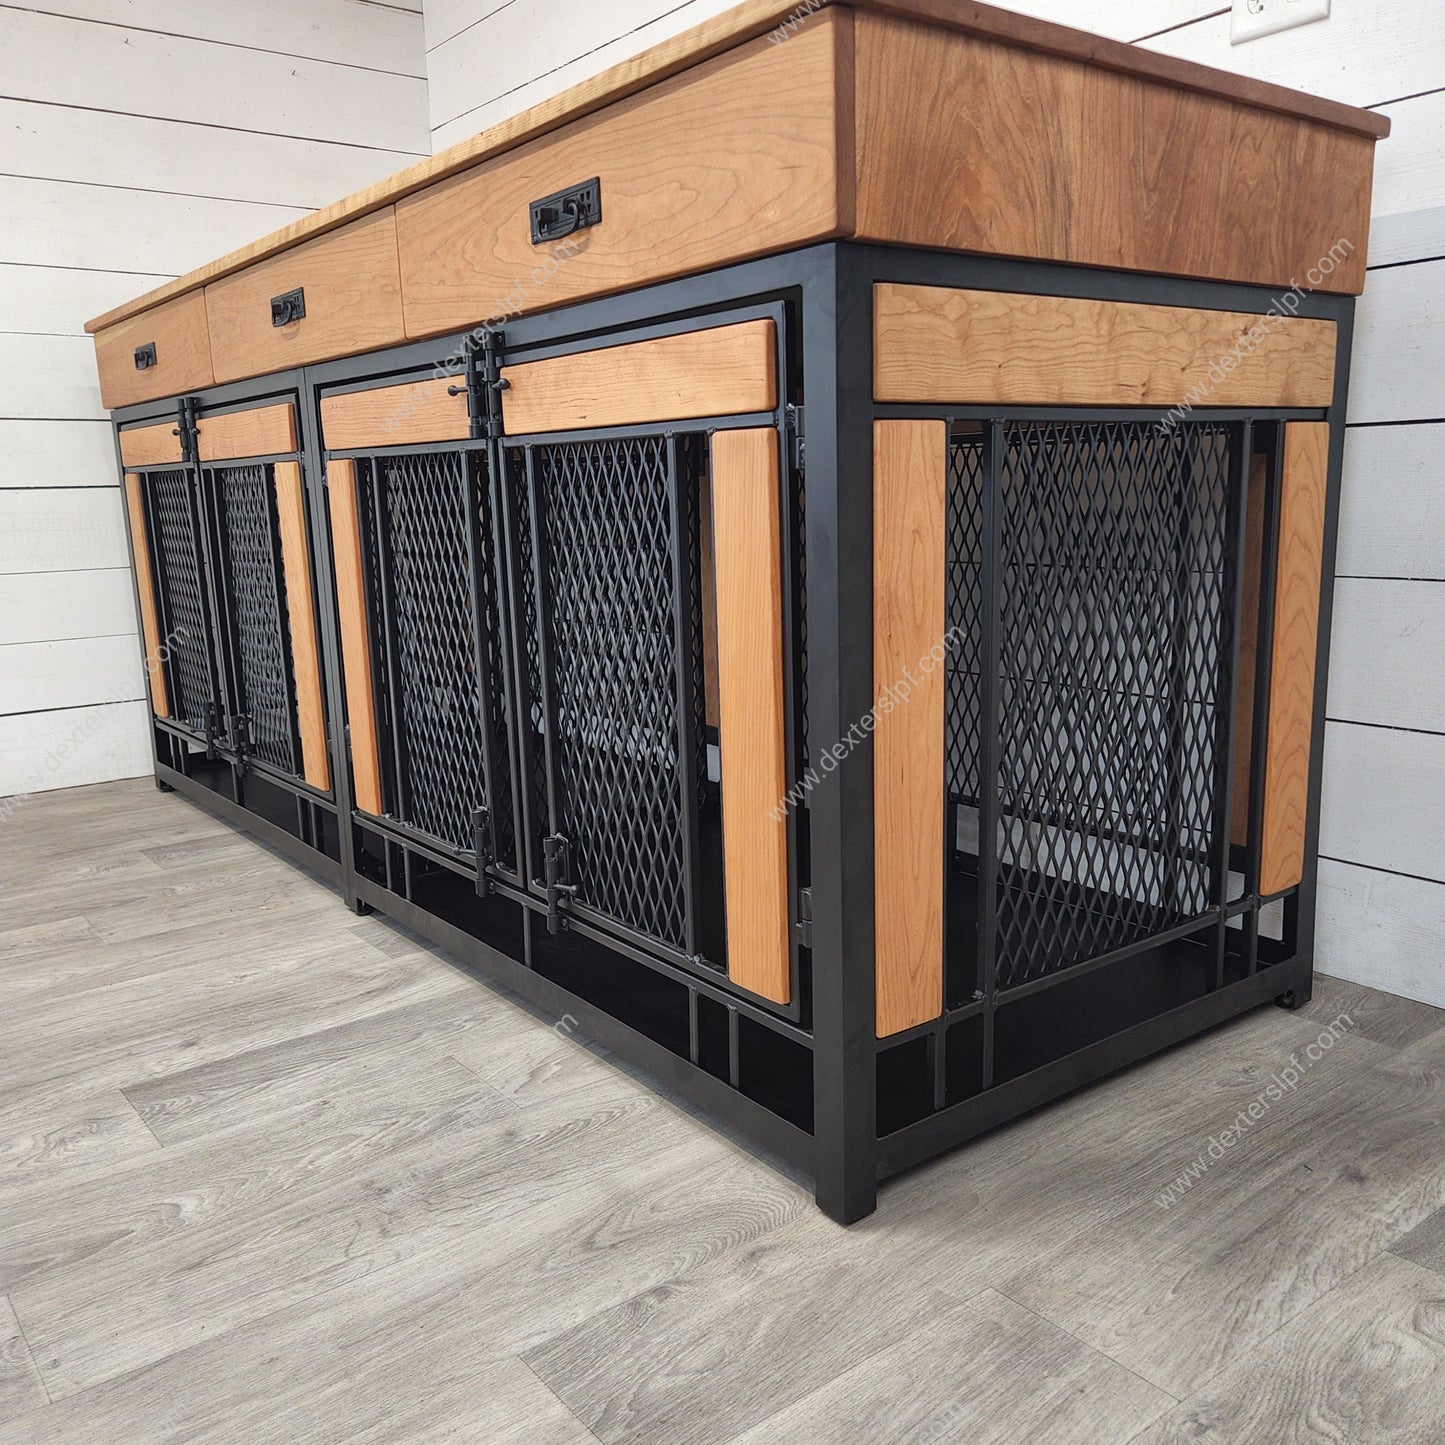 Finnian X-Large Double Dog Crate, with Drawers, XL Dog Crate Furniture, Modern Dog Crate, Dog Crate Furniture, Dog Kennel Furniture